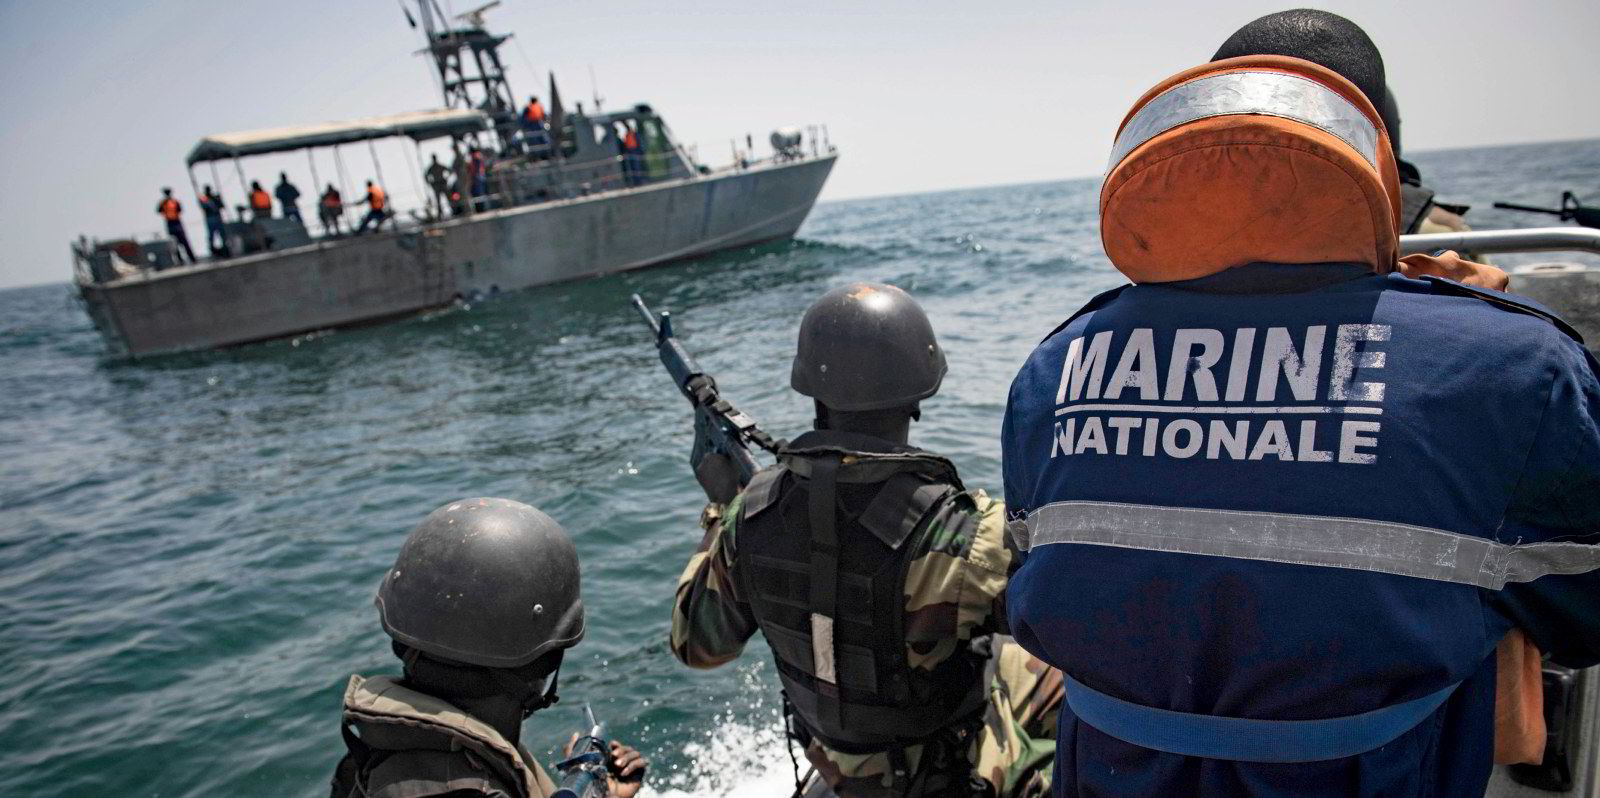 As piracy threat grows, it's time for Nigeria to stand and deliver | TradeWinds